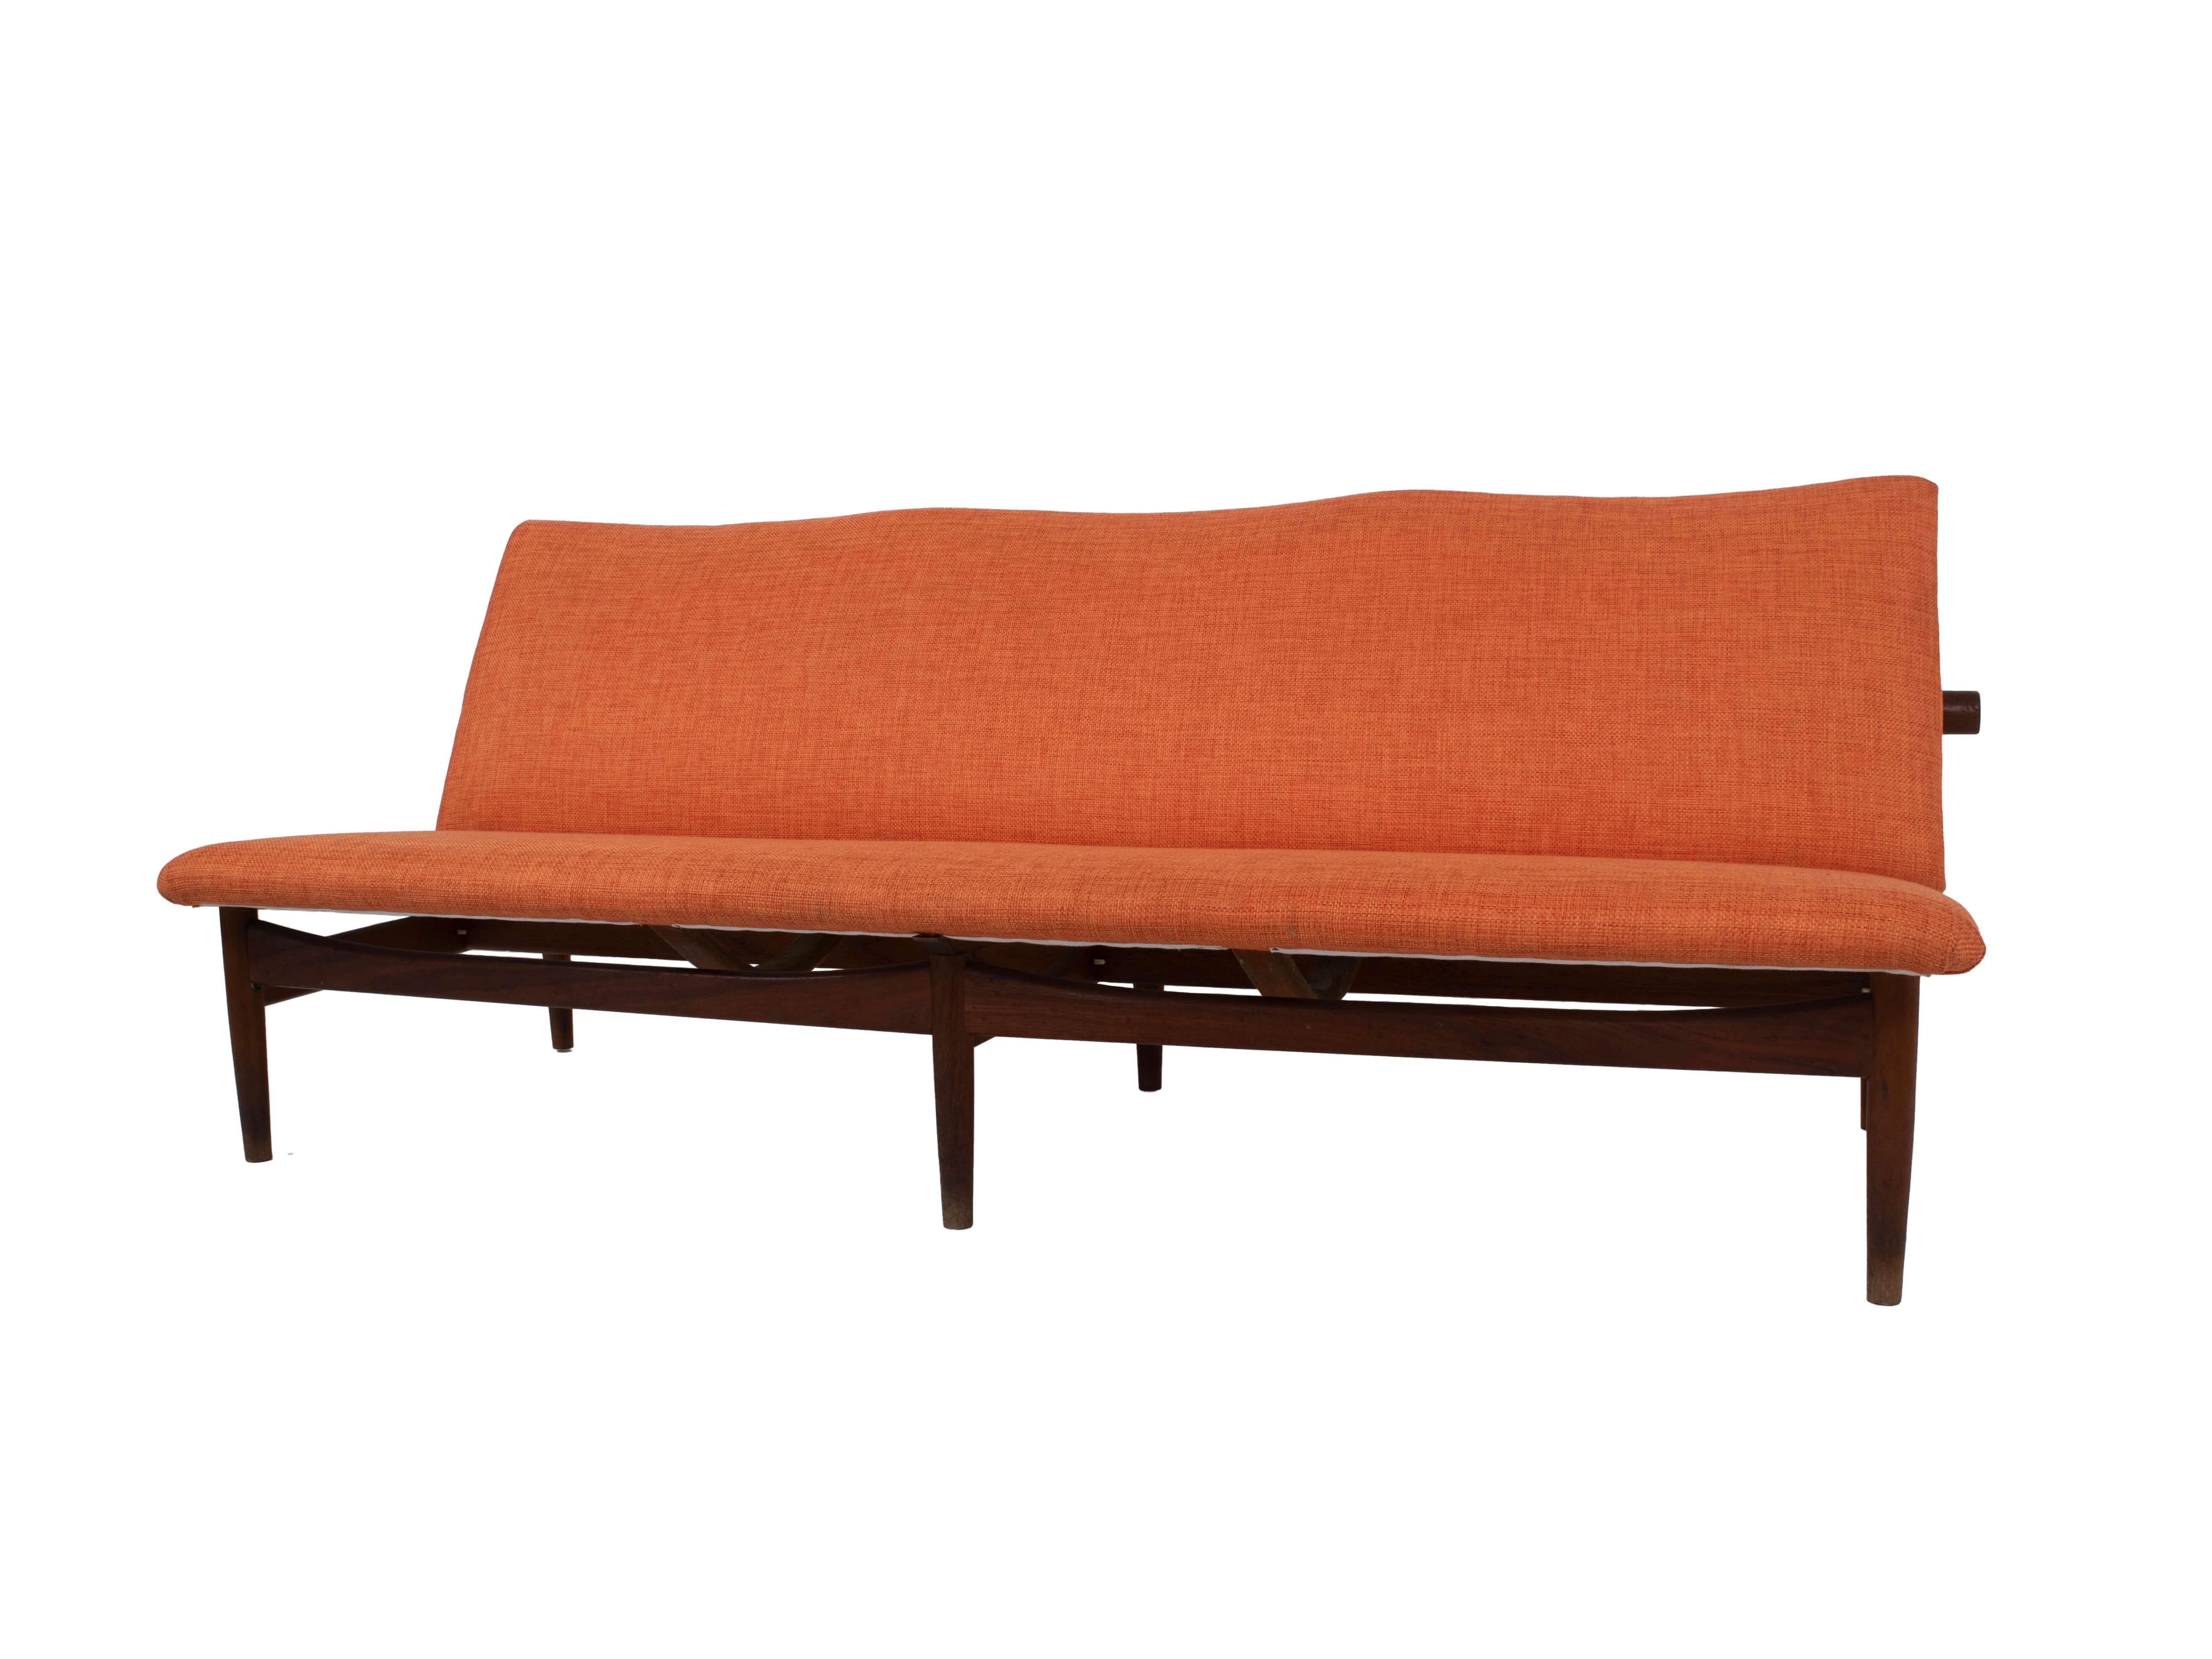 Amazing Finn Juhl sofa Model 137 in teak for France & Son, Denmark 1950s. This three-seater 'Japan' sofa has the elegance and round shapes that are so recognizable for Finn Juhl and the Scandinavian Modern Design. The sofa is wonderfully upholstered